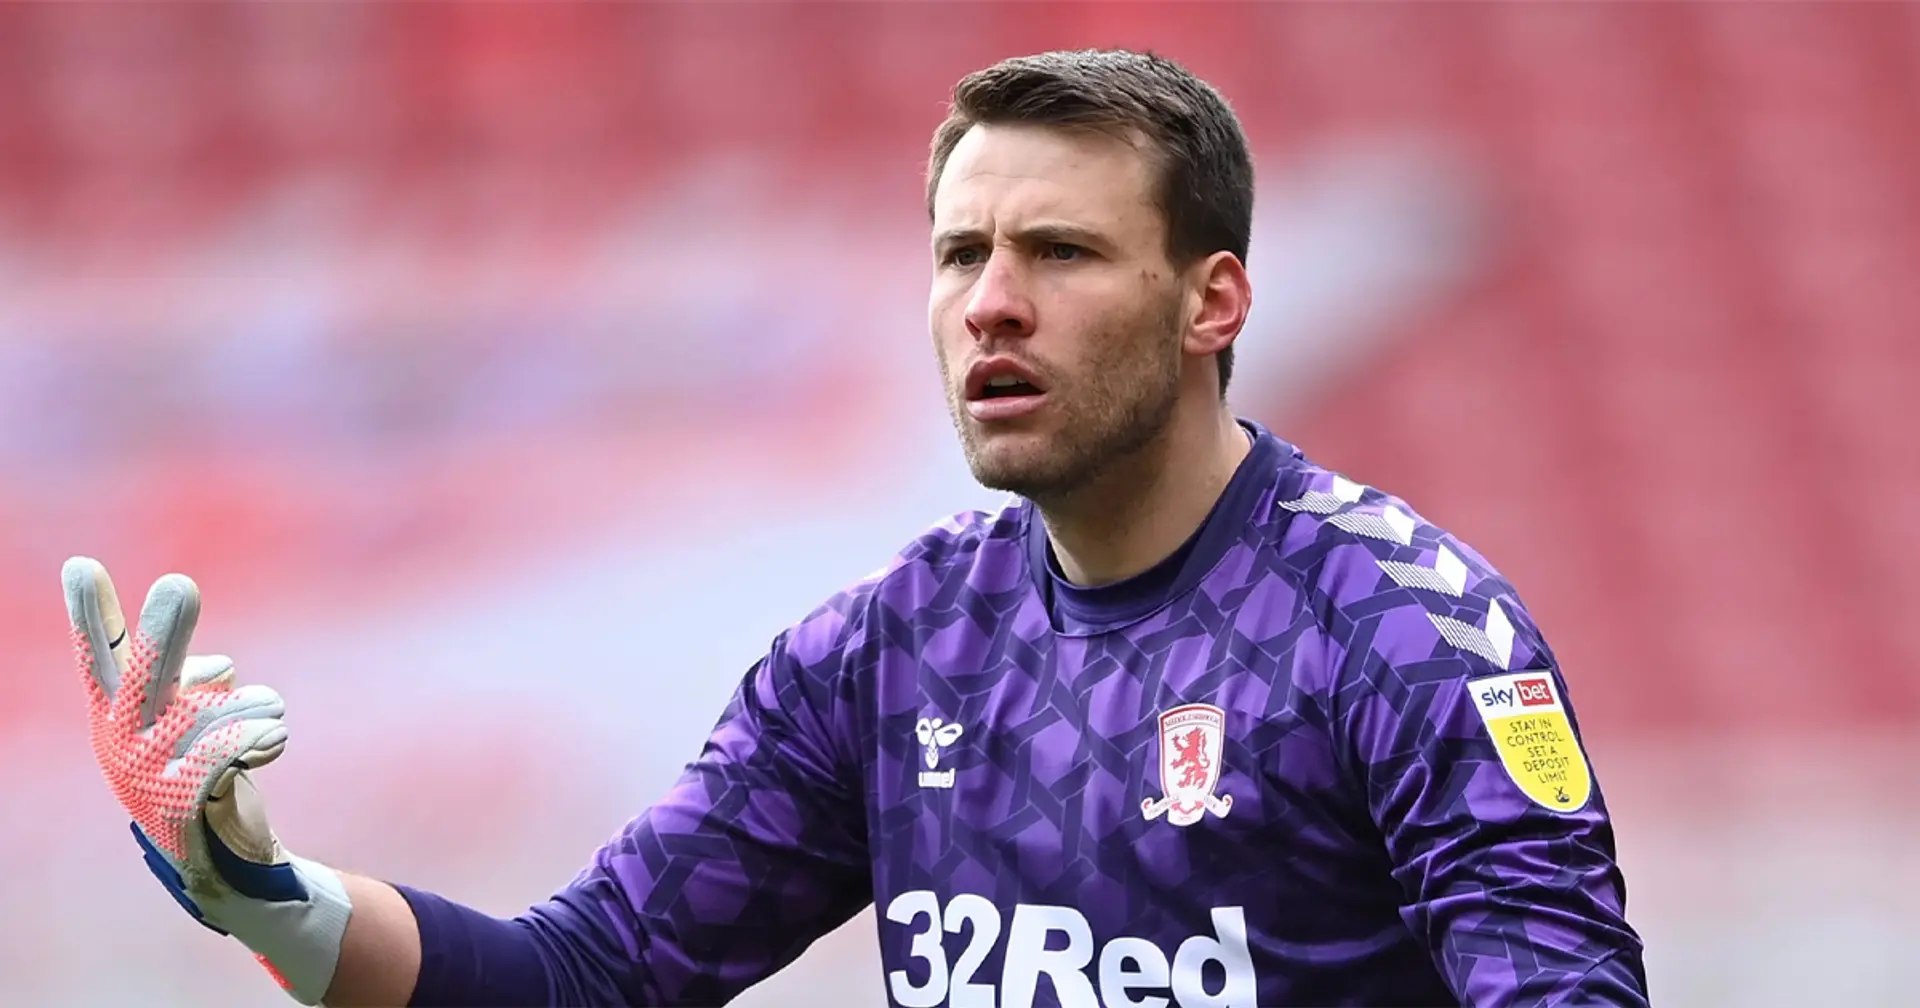 Chelsea looking at ex-Fulham keeper Marcus Bettinelli as third choice - The Telegraph (reliability: 5 stars)